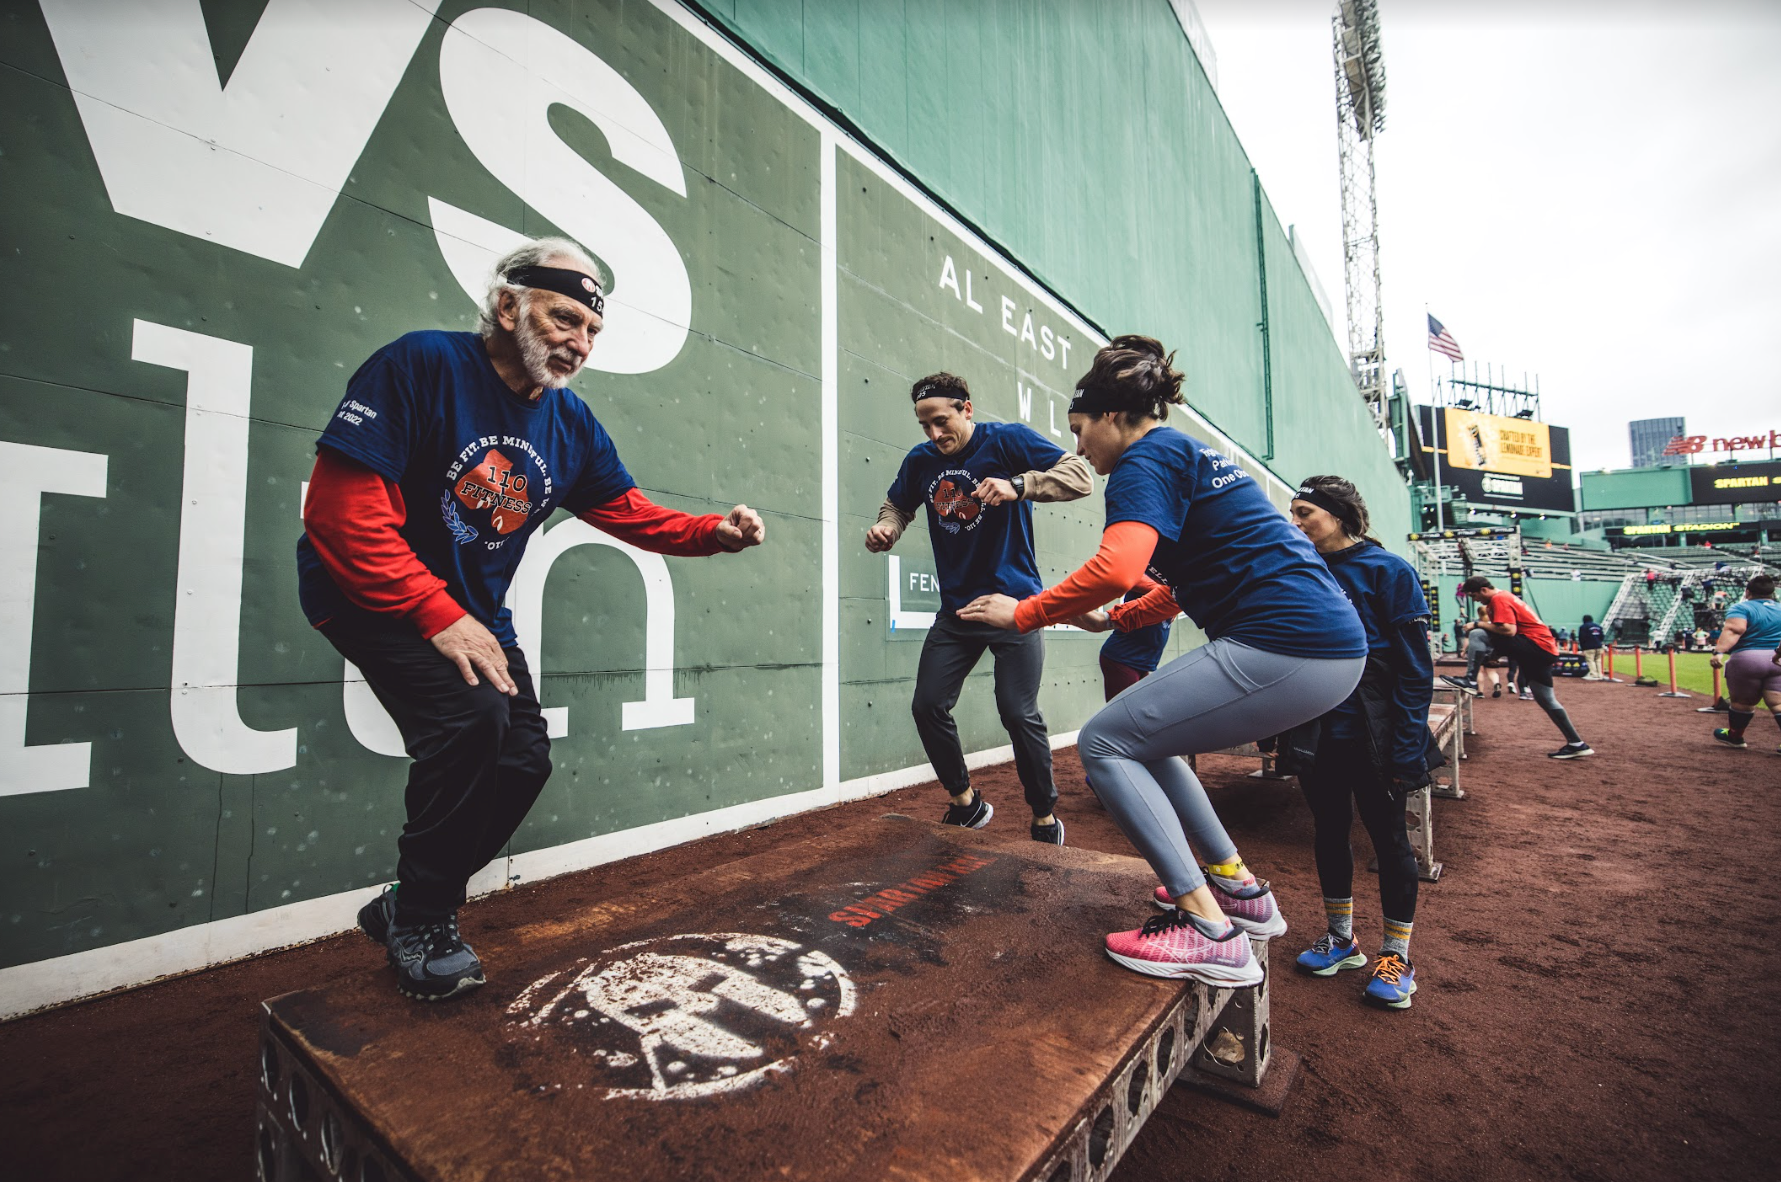 Spartan Stadion: The Epic Stadium Obstacle Course Race